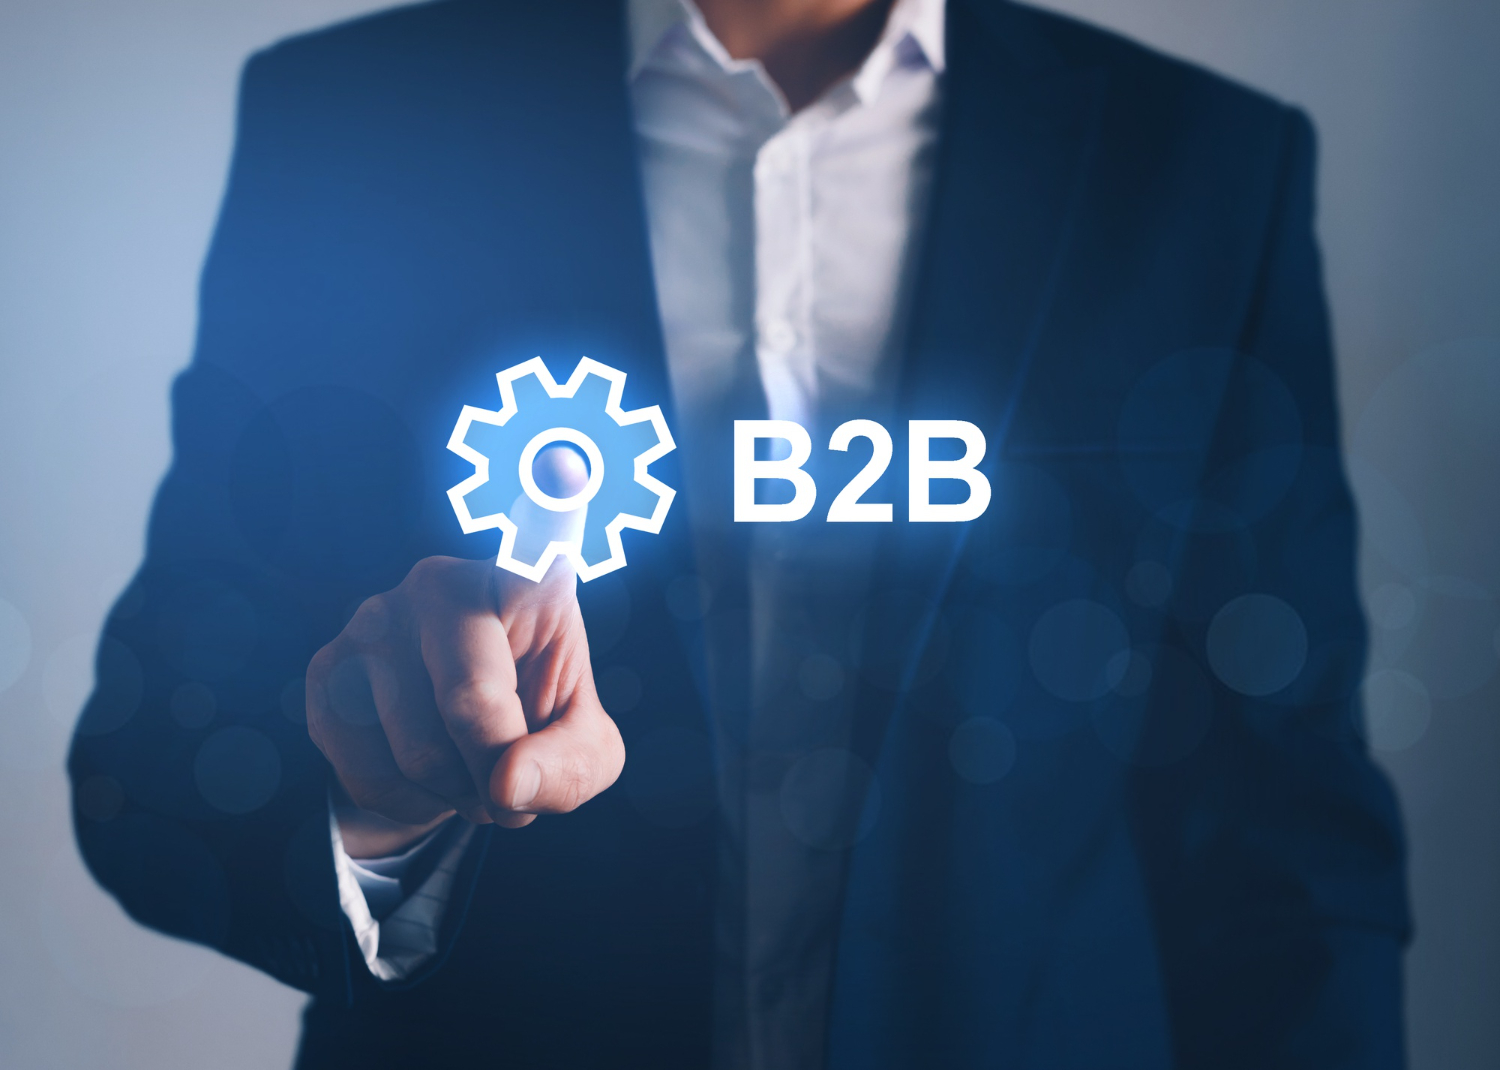 what is b2b sales